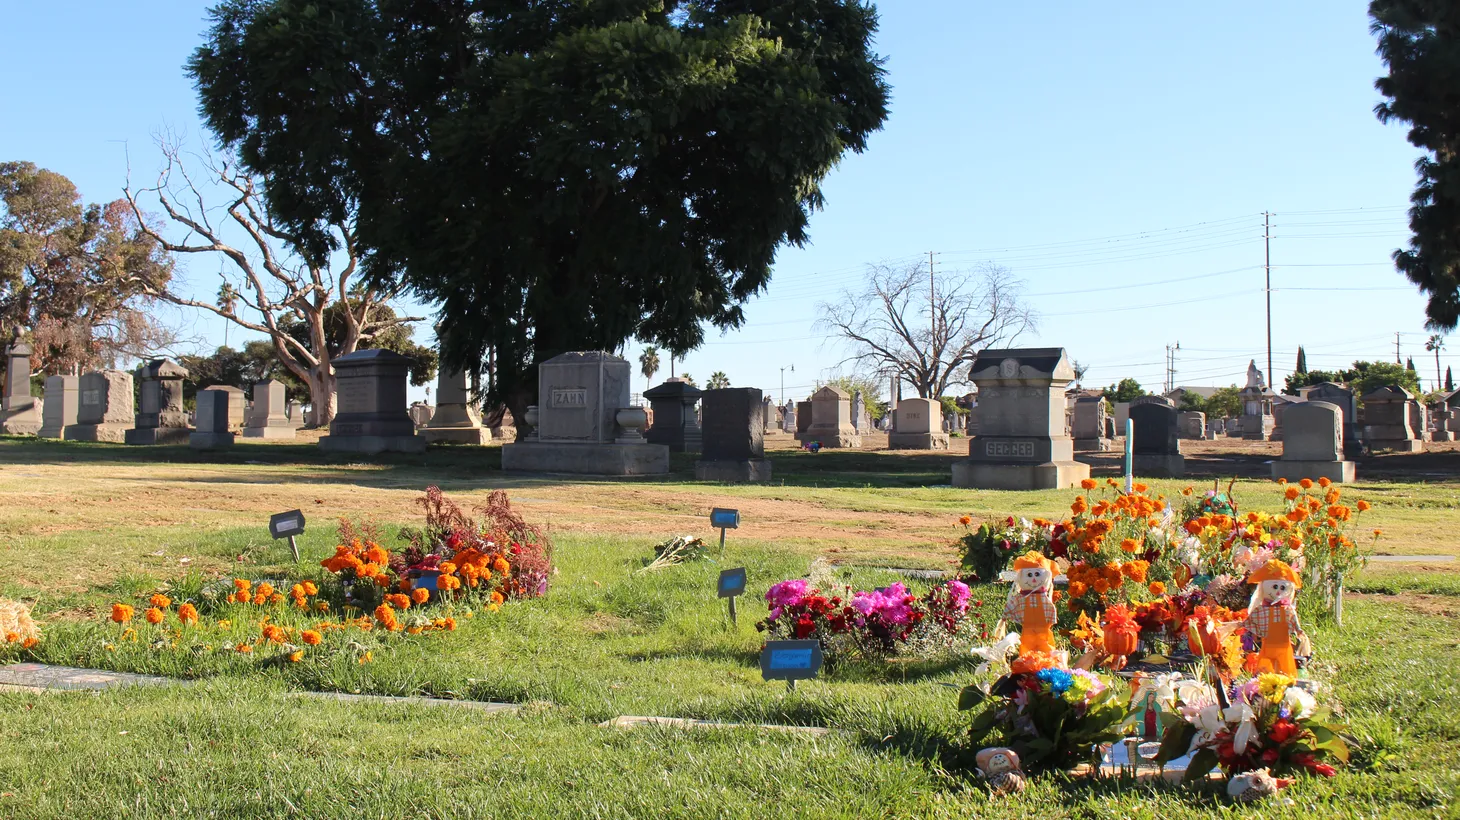 LA’s first Día de los Muertos celebration happened nearly 50 years ago at Boyle Heights’ Evergreen Cemetery, where walking tours are offered to the public.